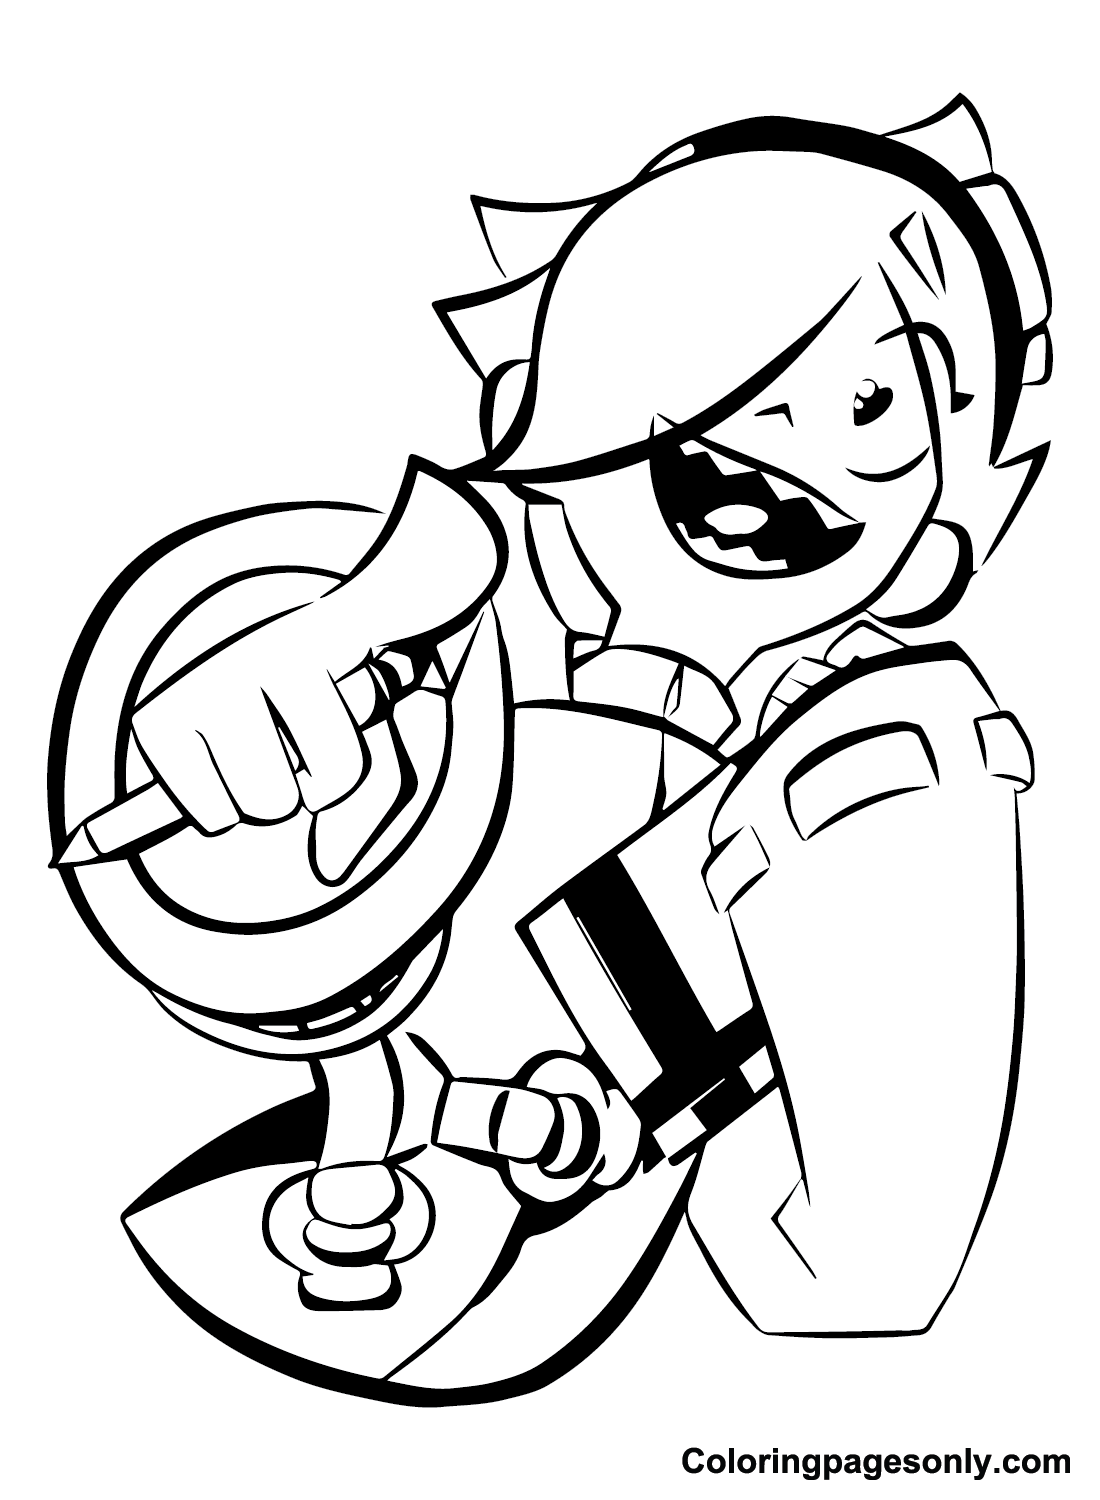 Free Colette Brawl Stars Coloring Page